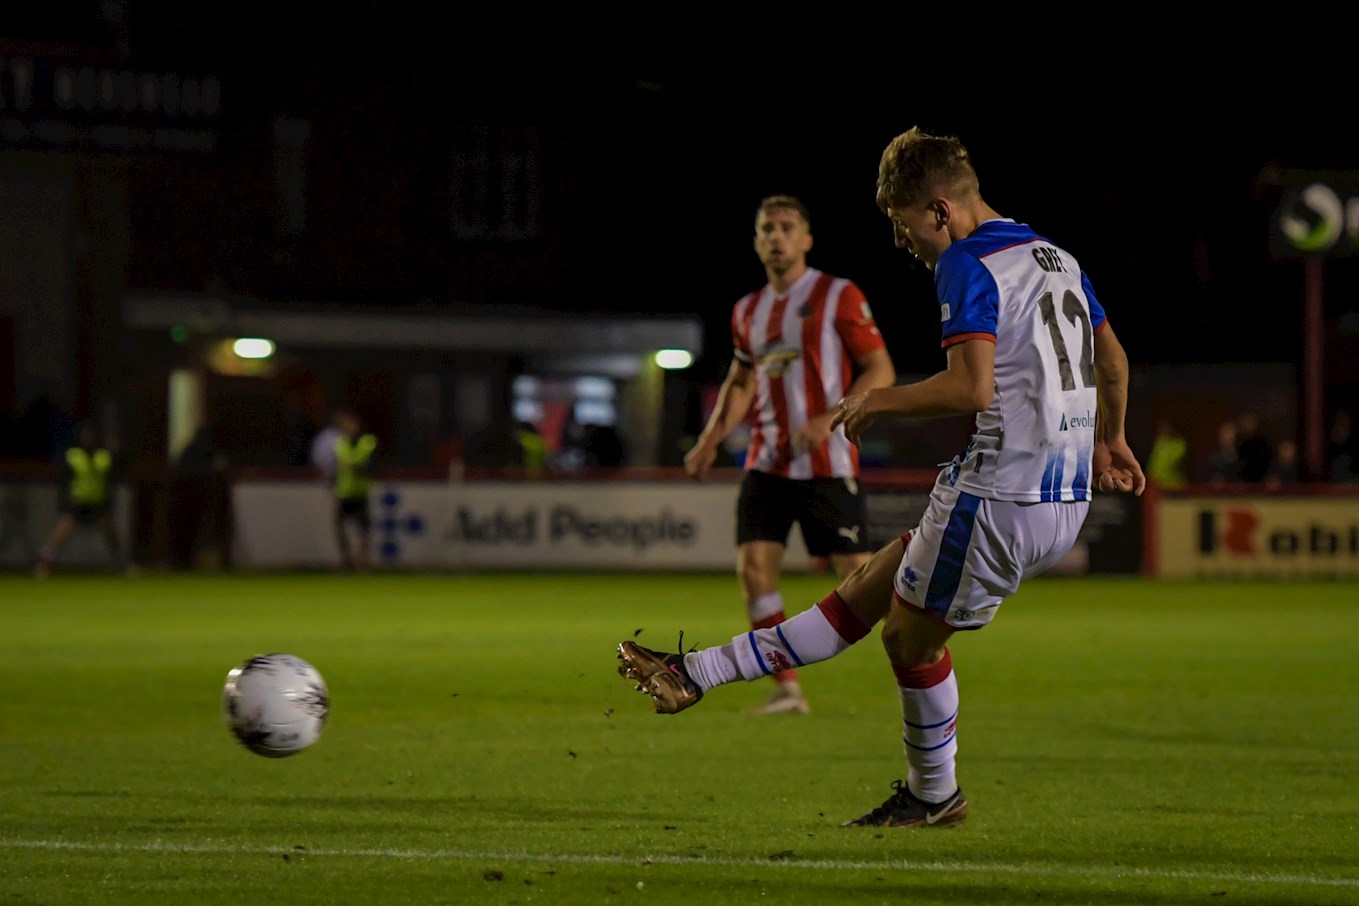 Extended Match Highlights  Altrincham 2-2 Hartlepool United